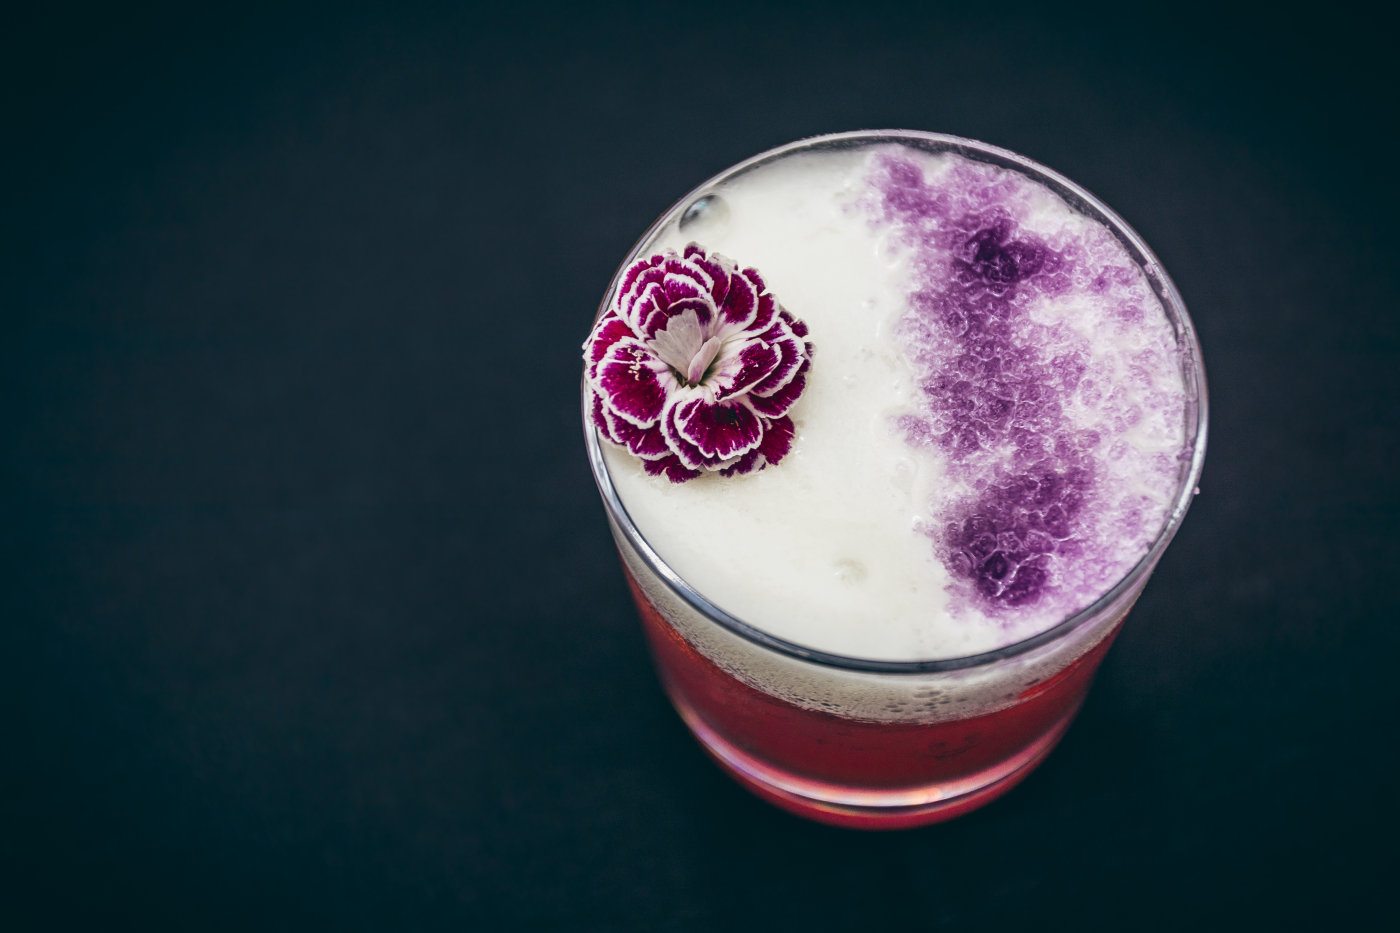 Pink floral cocktail from 20 Stories Bar